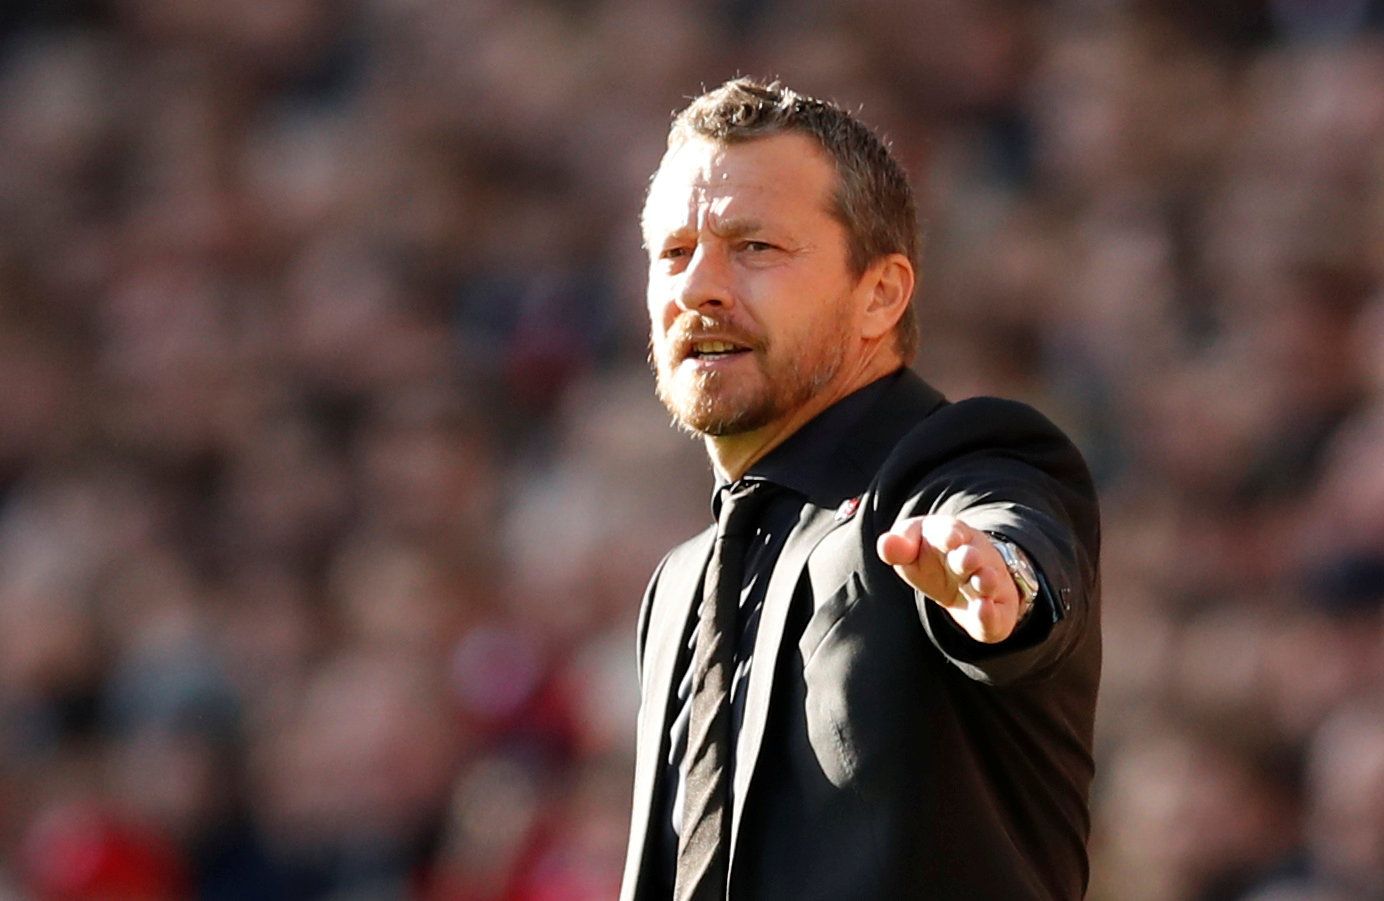 Soccer Football - Premier League - Liverpool v Fulham - Anfield, Liverpool, Britain - November 11, 2018  Fulham manager Slavisa Jokanovic gestures     Action Images via Reuters/Andrew Boyers  EDITORIAL USE ONLY. No use with unauthorized audio, video, data, fixture lists, club/league logos or 